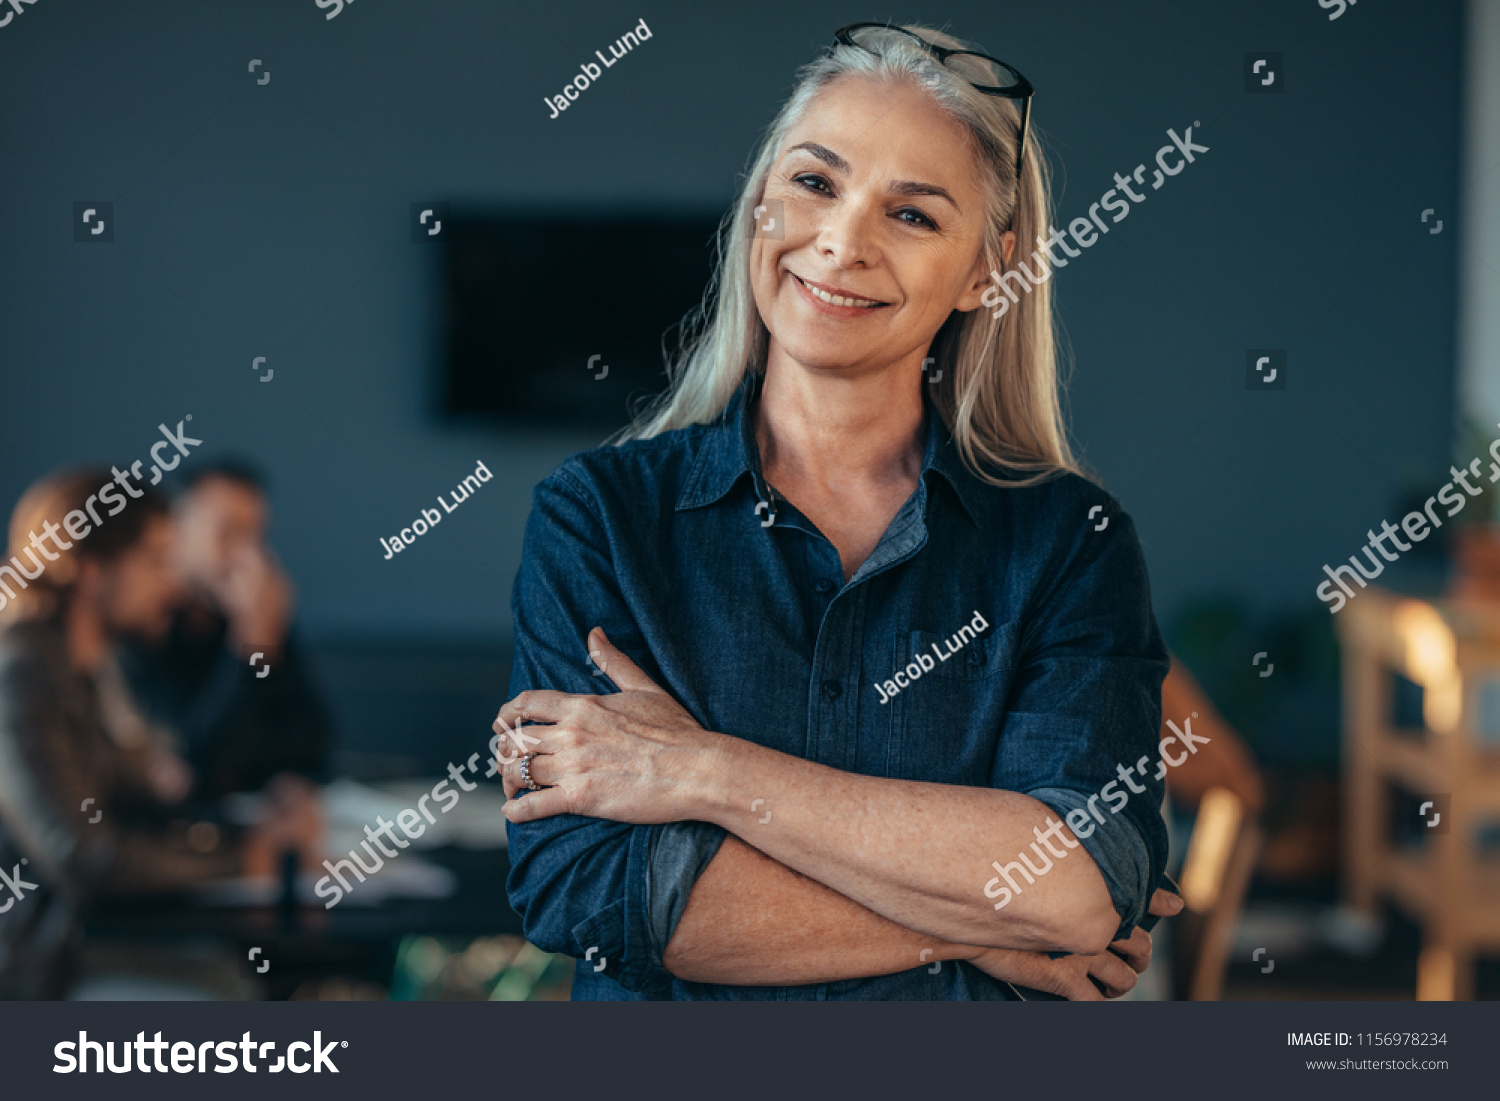 Portrait of confident senior business woman standing in office with her arms crossed. Mature female in office with colleagues discussing work at the back. #1156978234